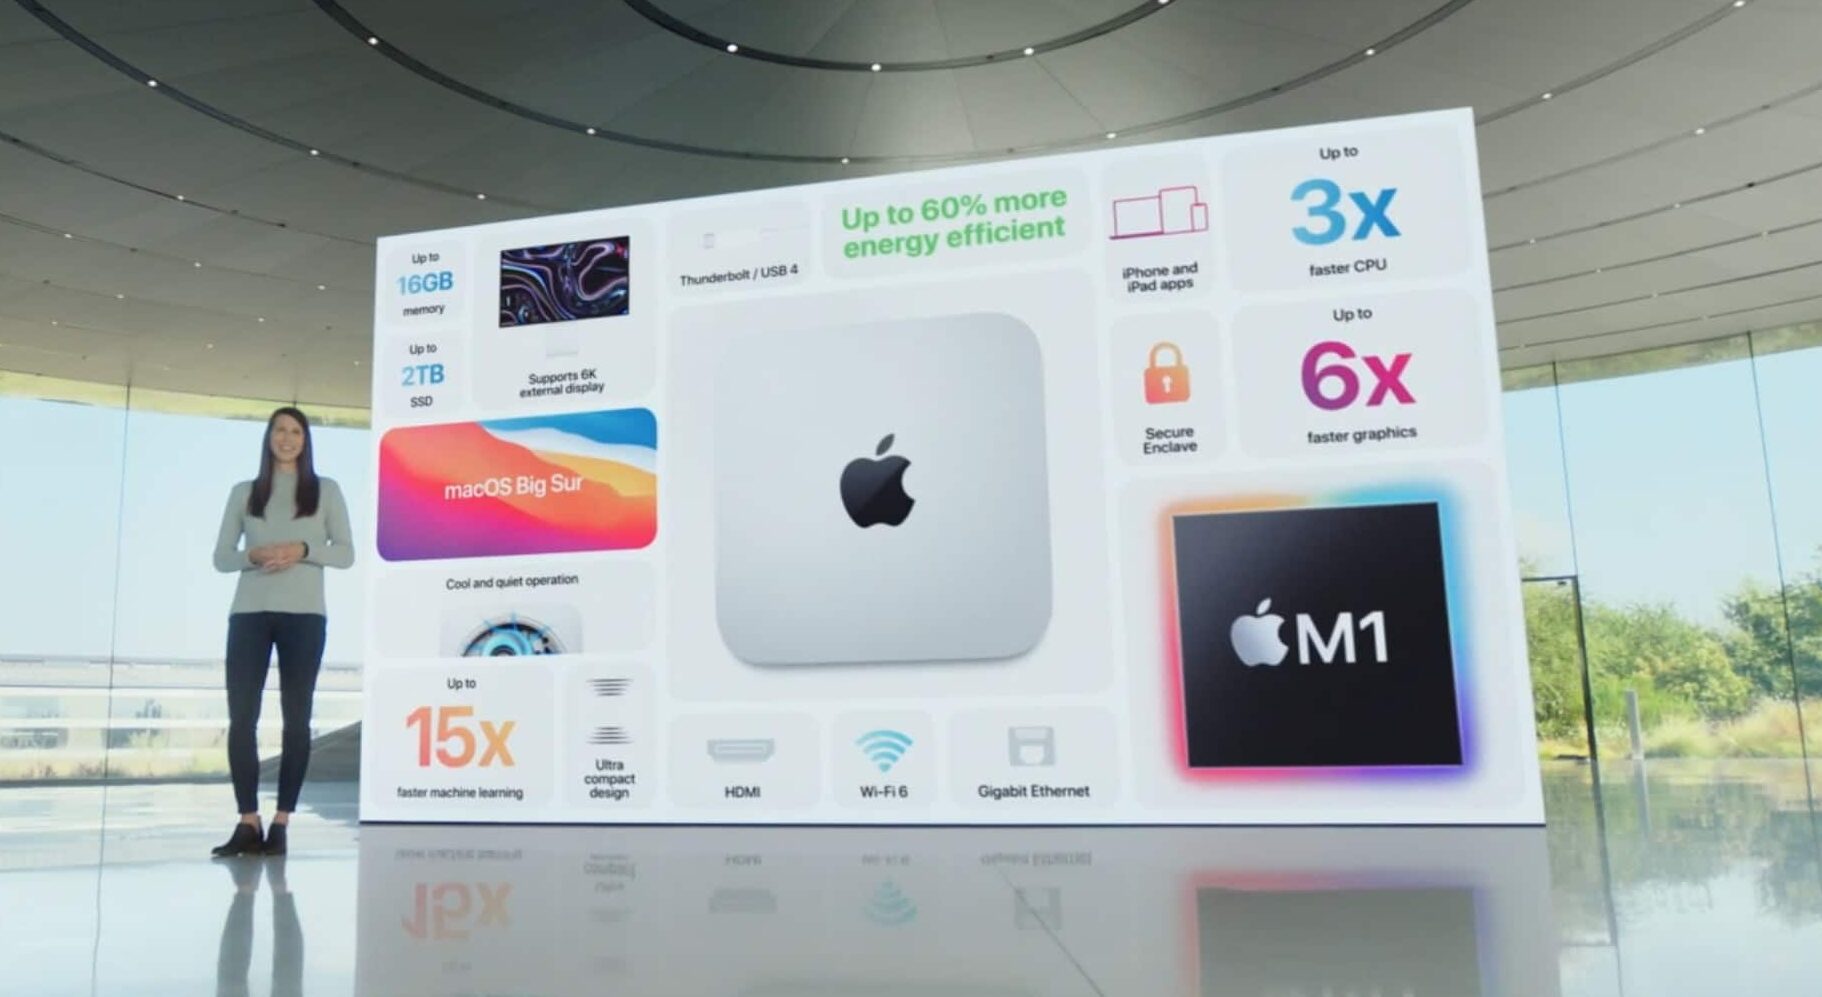 The Mac mini promises loads of features at a budget price.